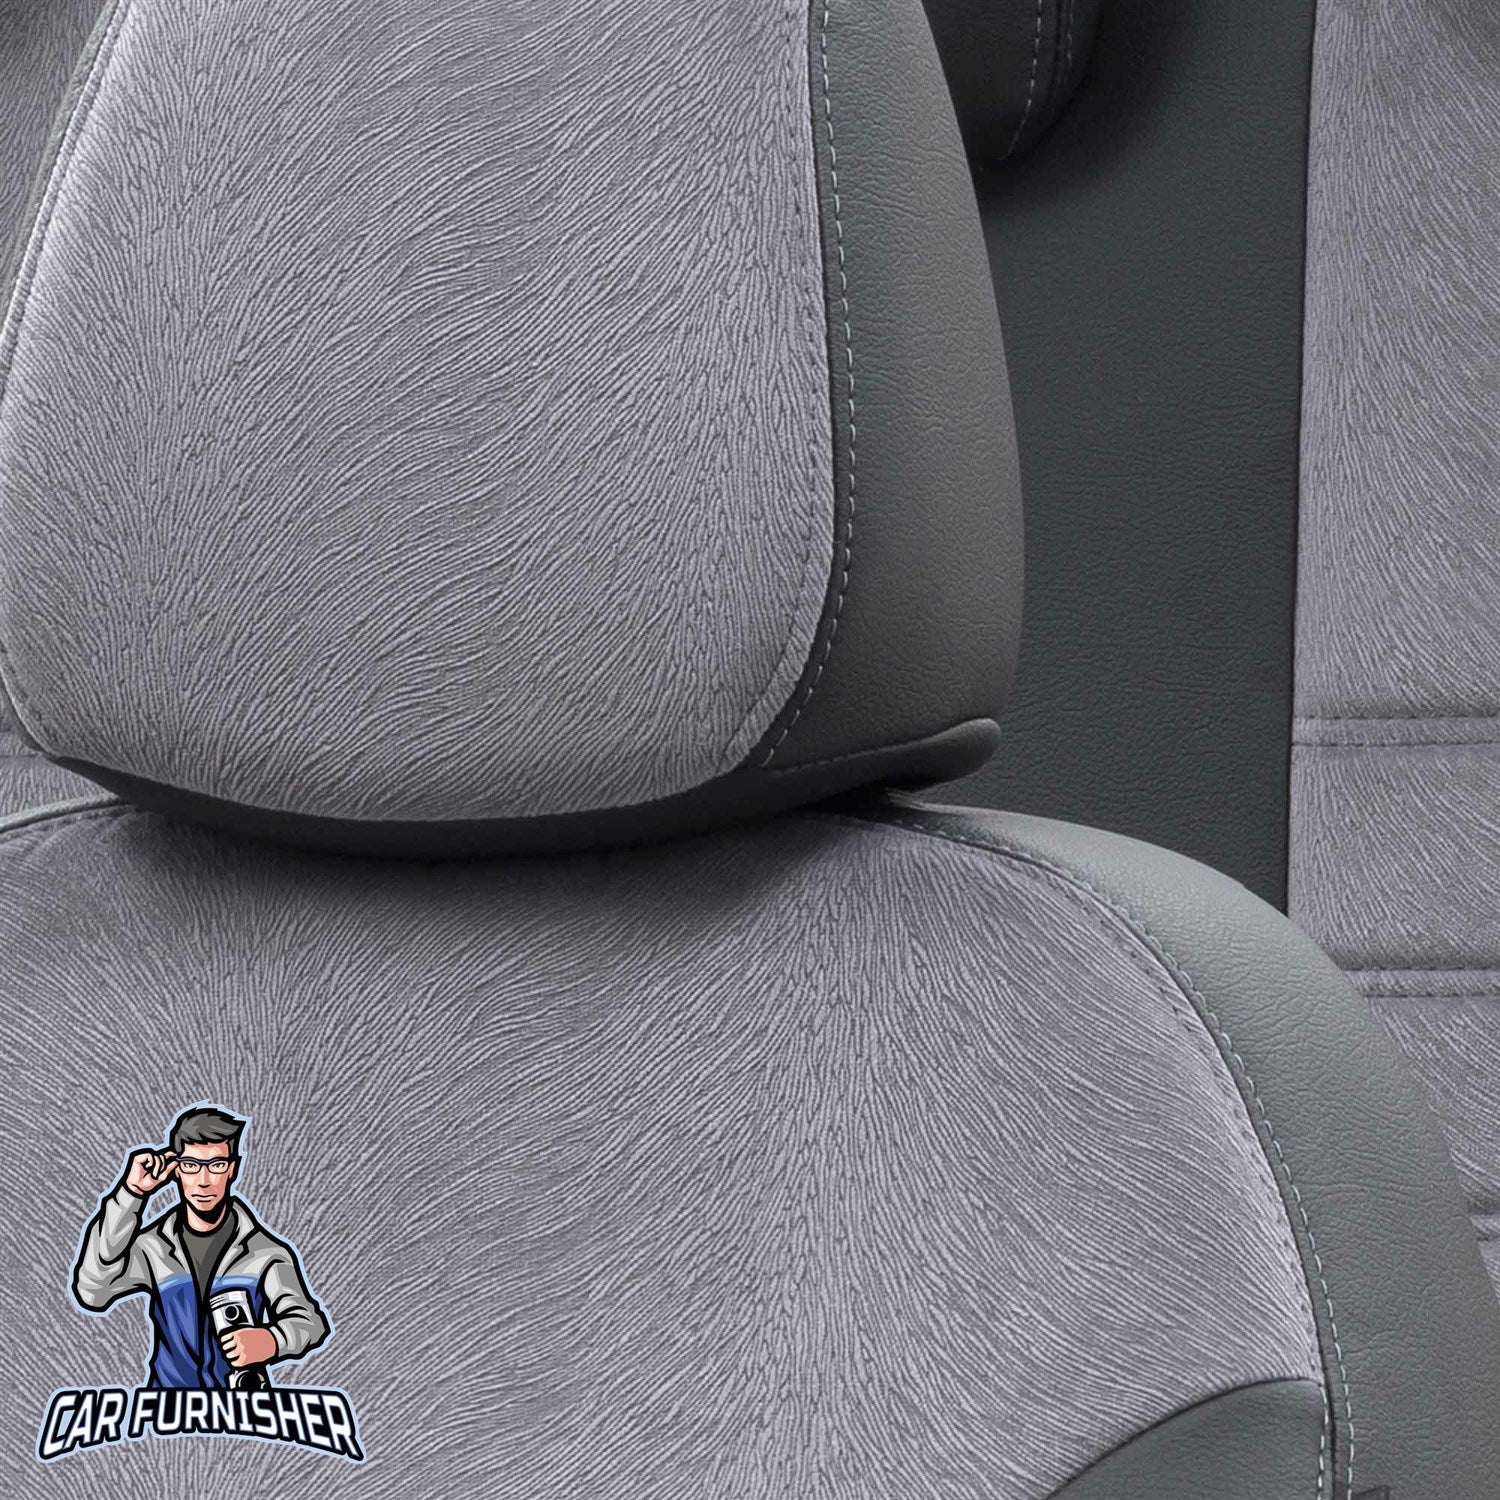 Peugeot Bipper Car Seat Covers 2007-2023 London Design Smoked Black Leather & Fabric